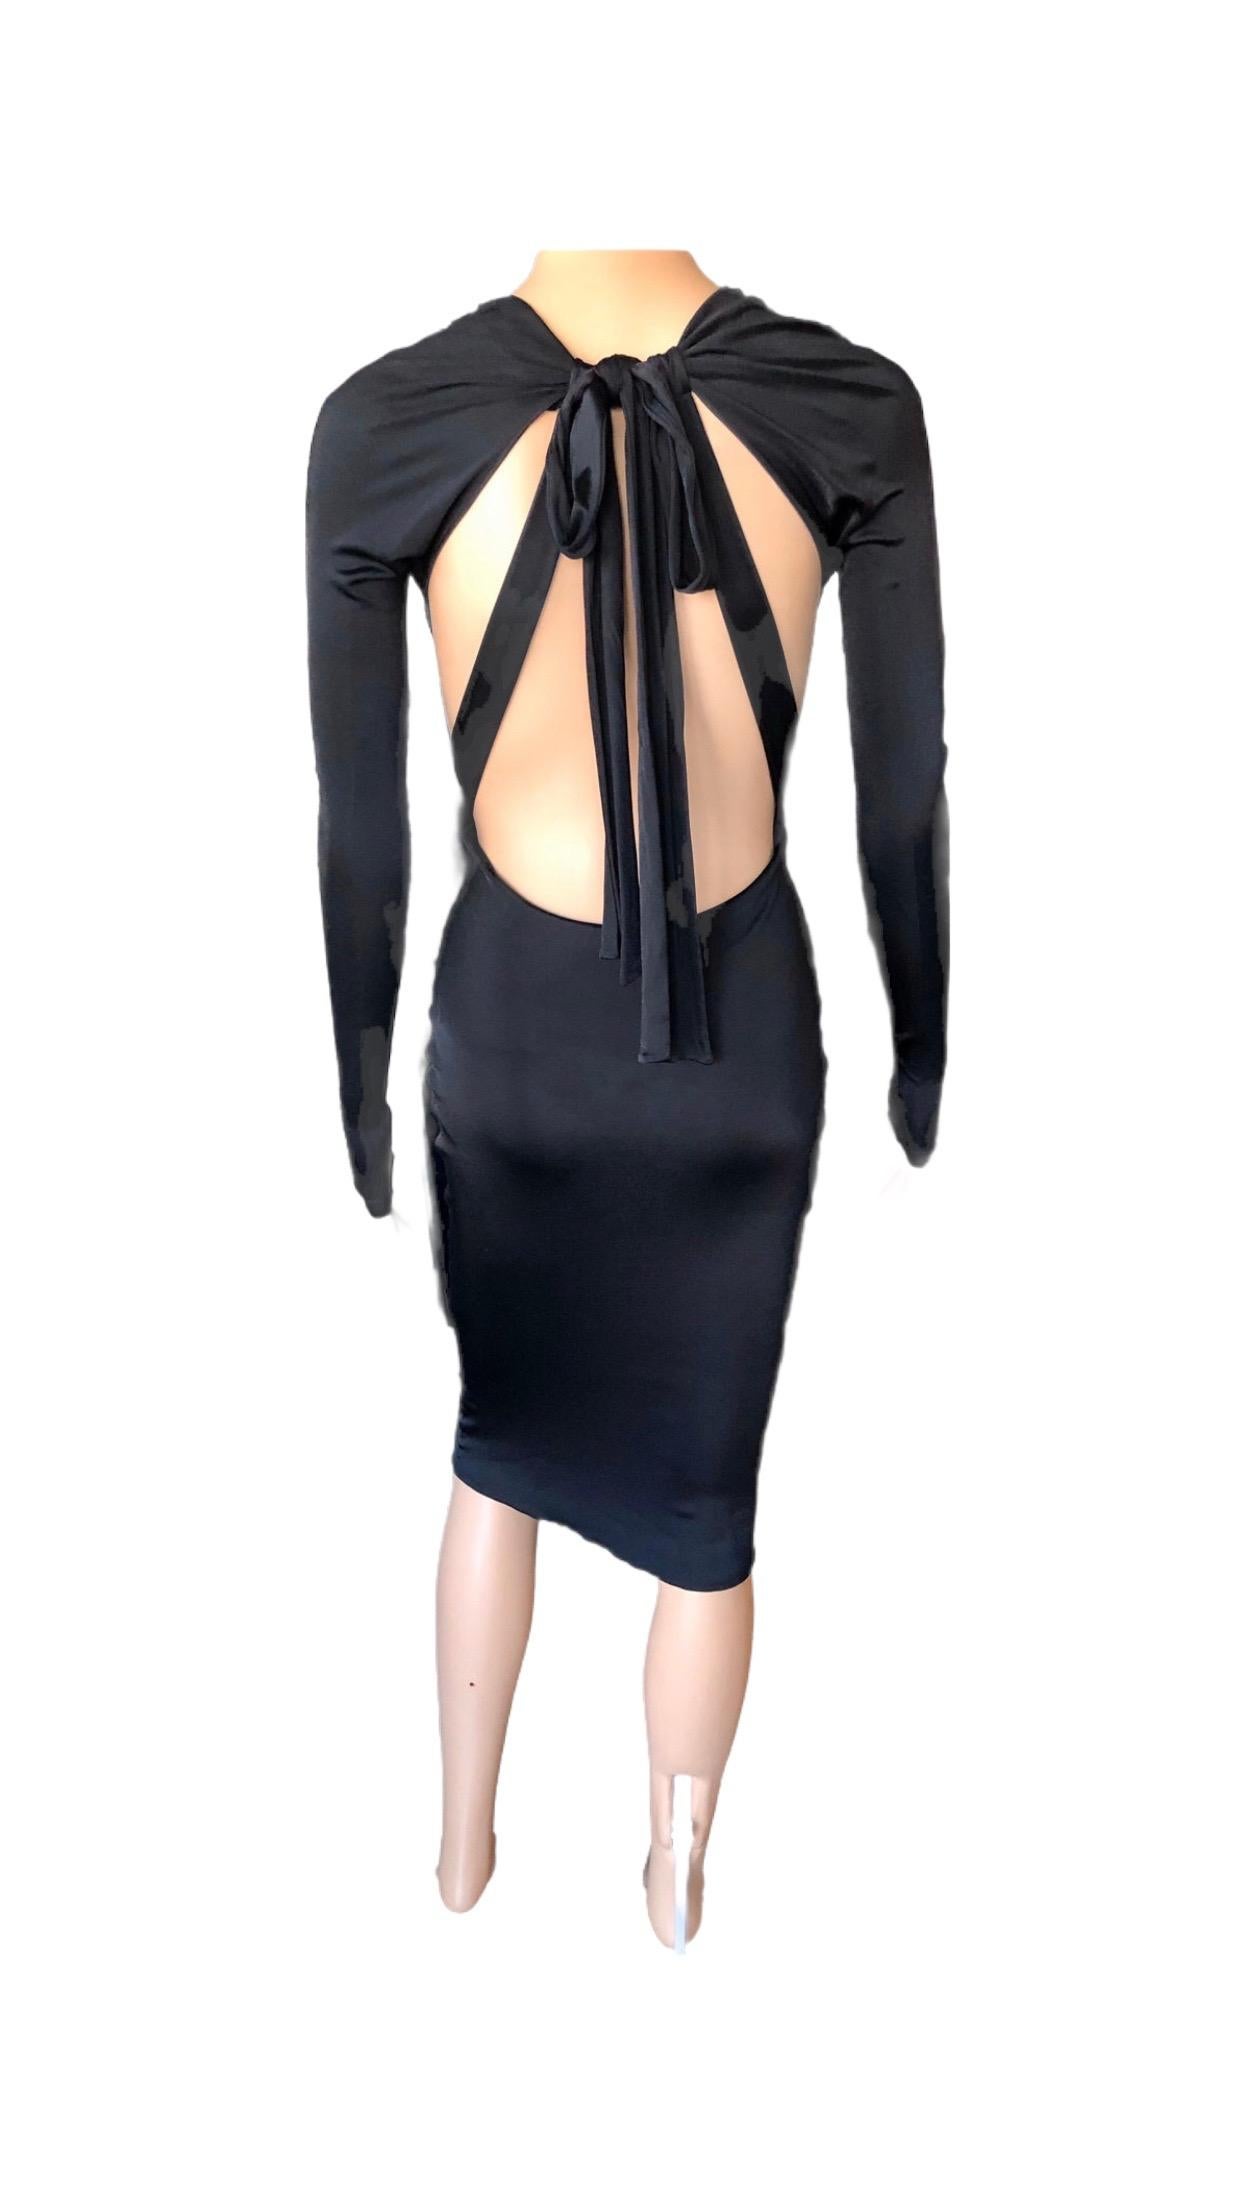 Gucci S/S 2005 Tom Ford Plunging Cutout Backless Bodycon Black Dress For Sale 11